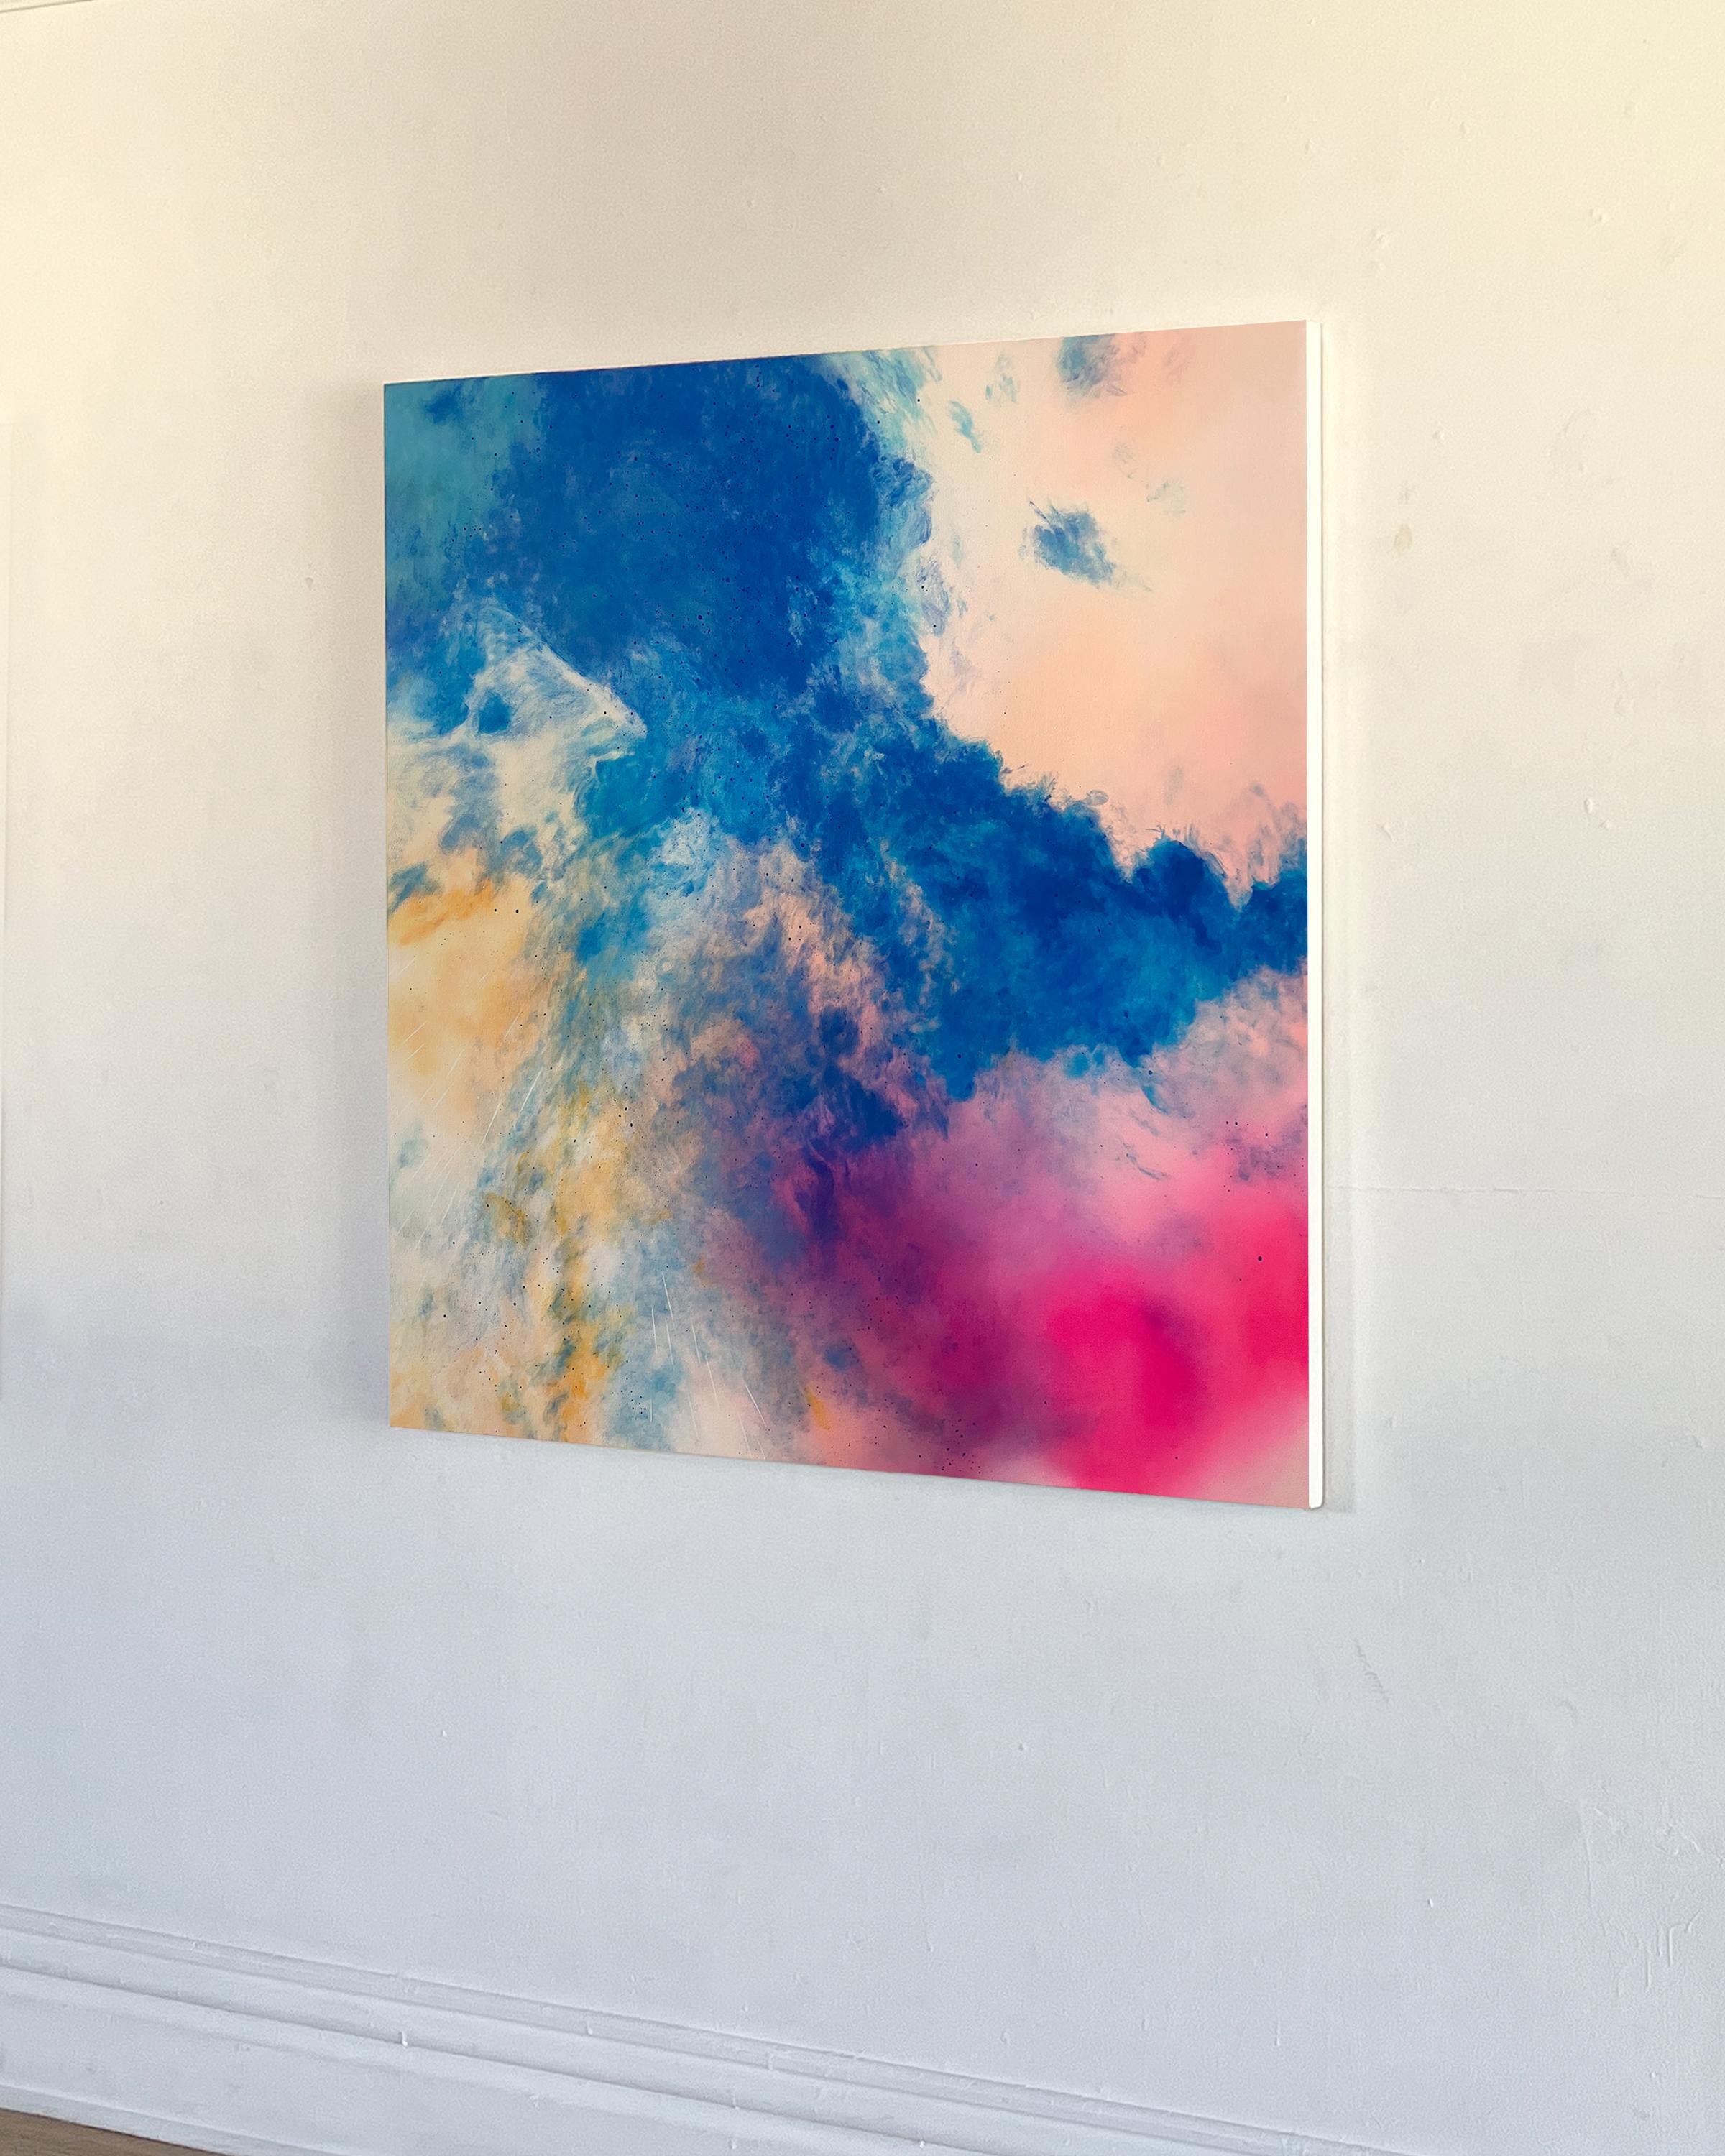 <p>Artist Comments<br>Artist Mary Dorfner Hay presents abstractions of bold colors in motion for her spiritual series, Crown. She illustrates the crown chakra energy using celestial bodies as inspiration for bold compositions filled with light and